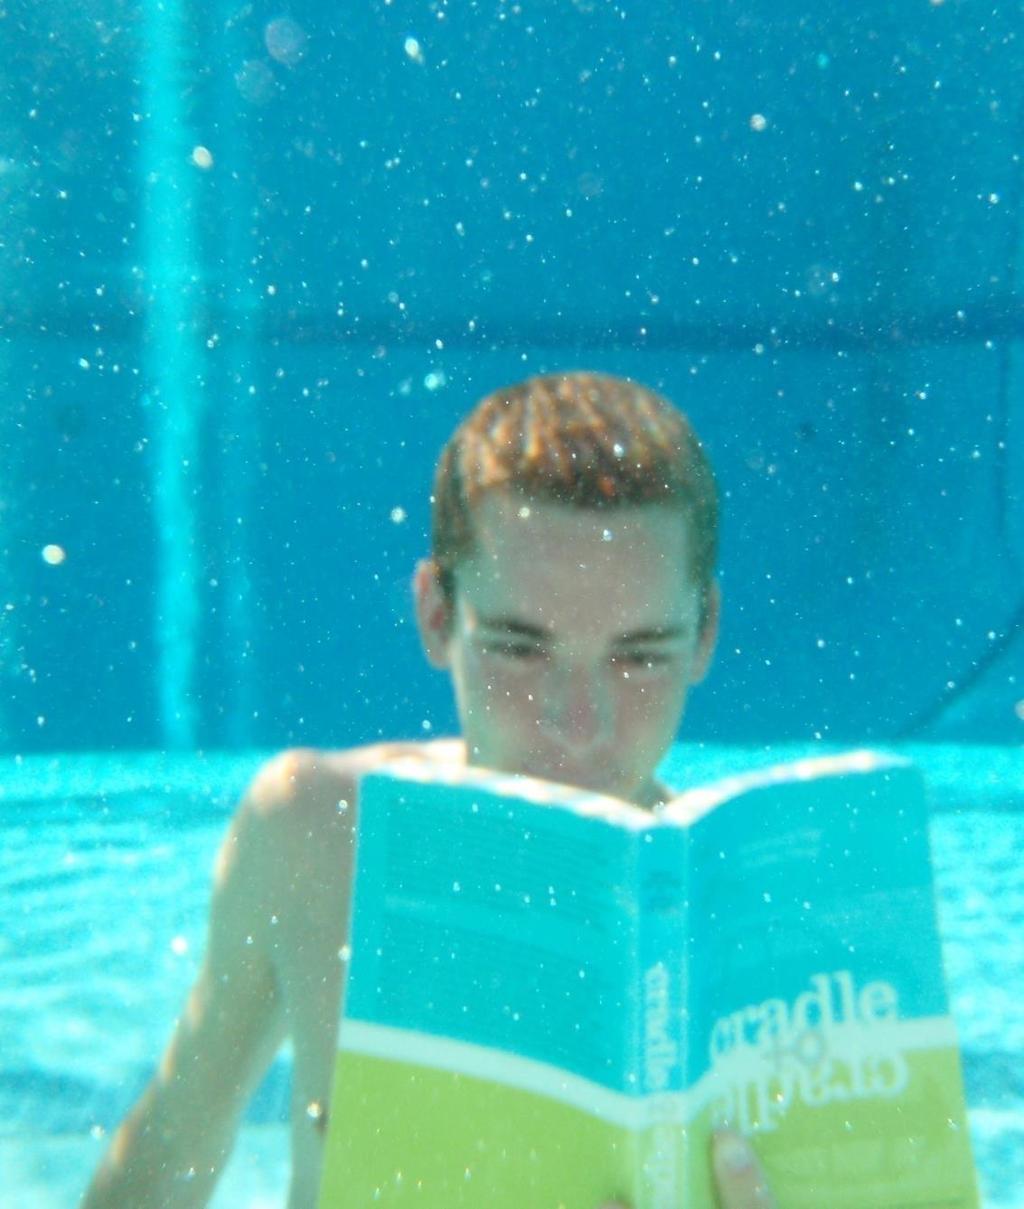 "A person with a book goes to the pool.